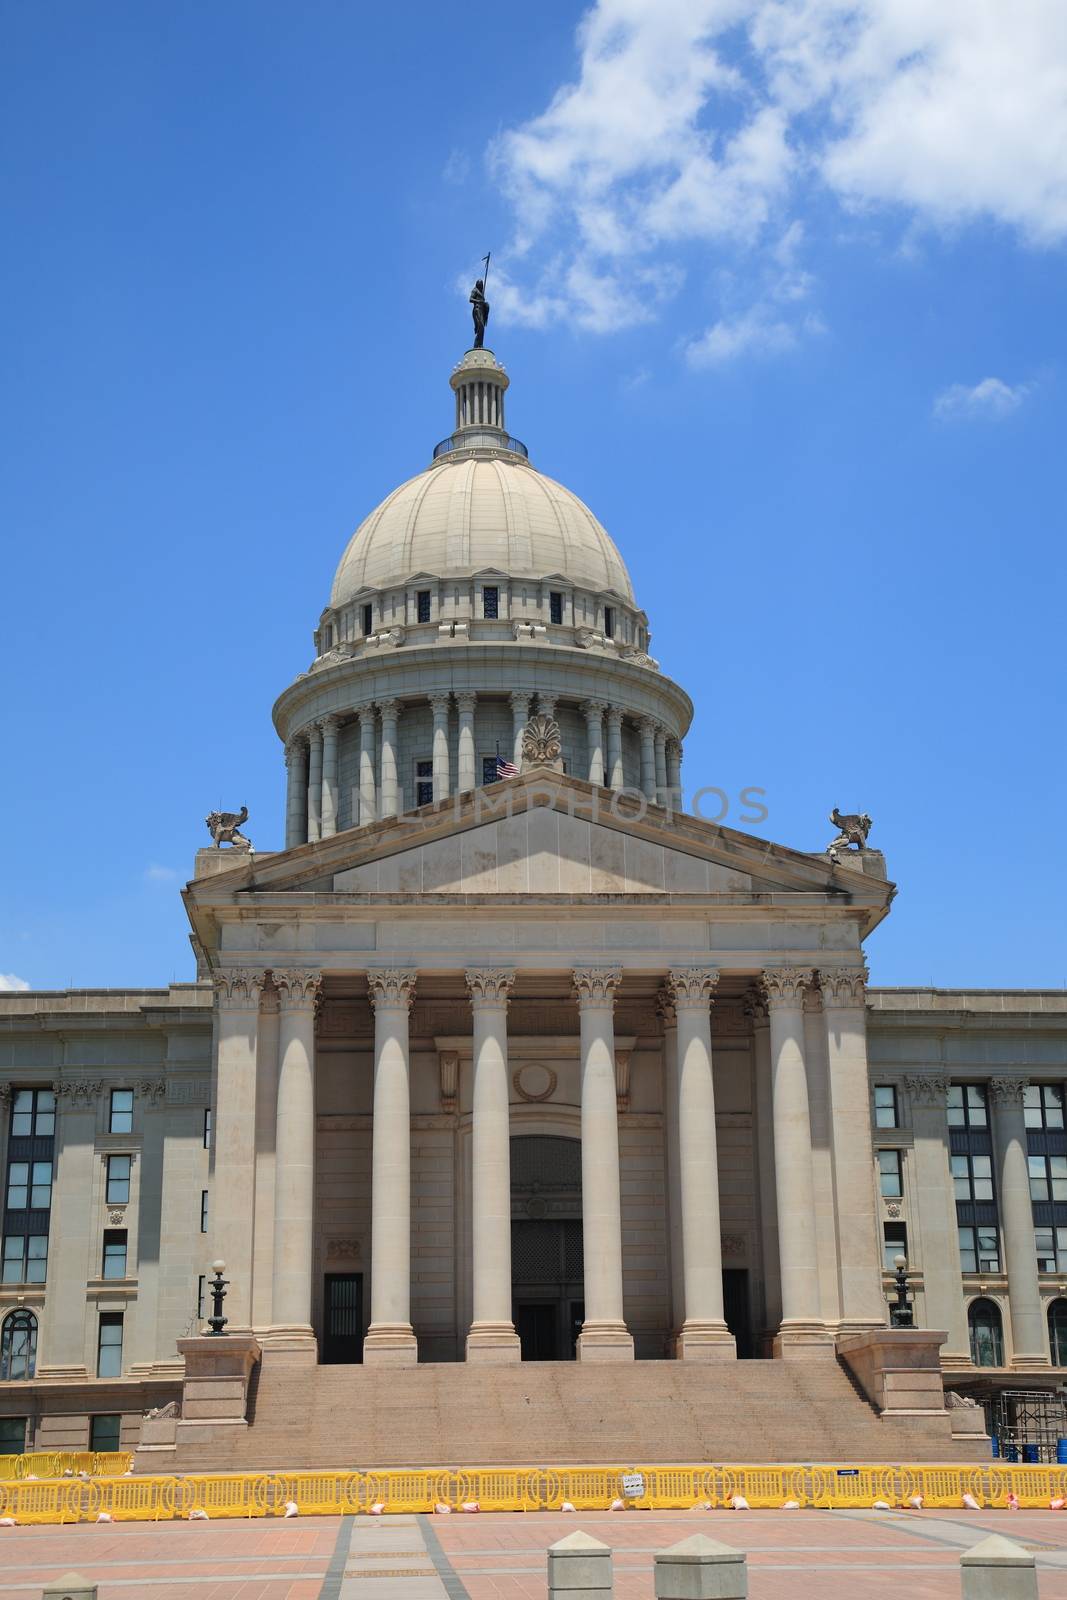 The state capitol building in Oklahoma City, with dome, stairs and columns.